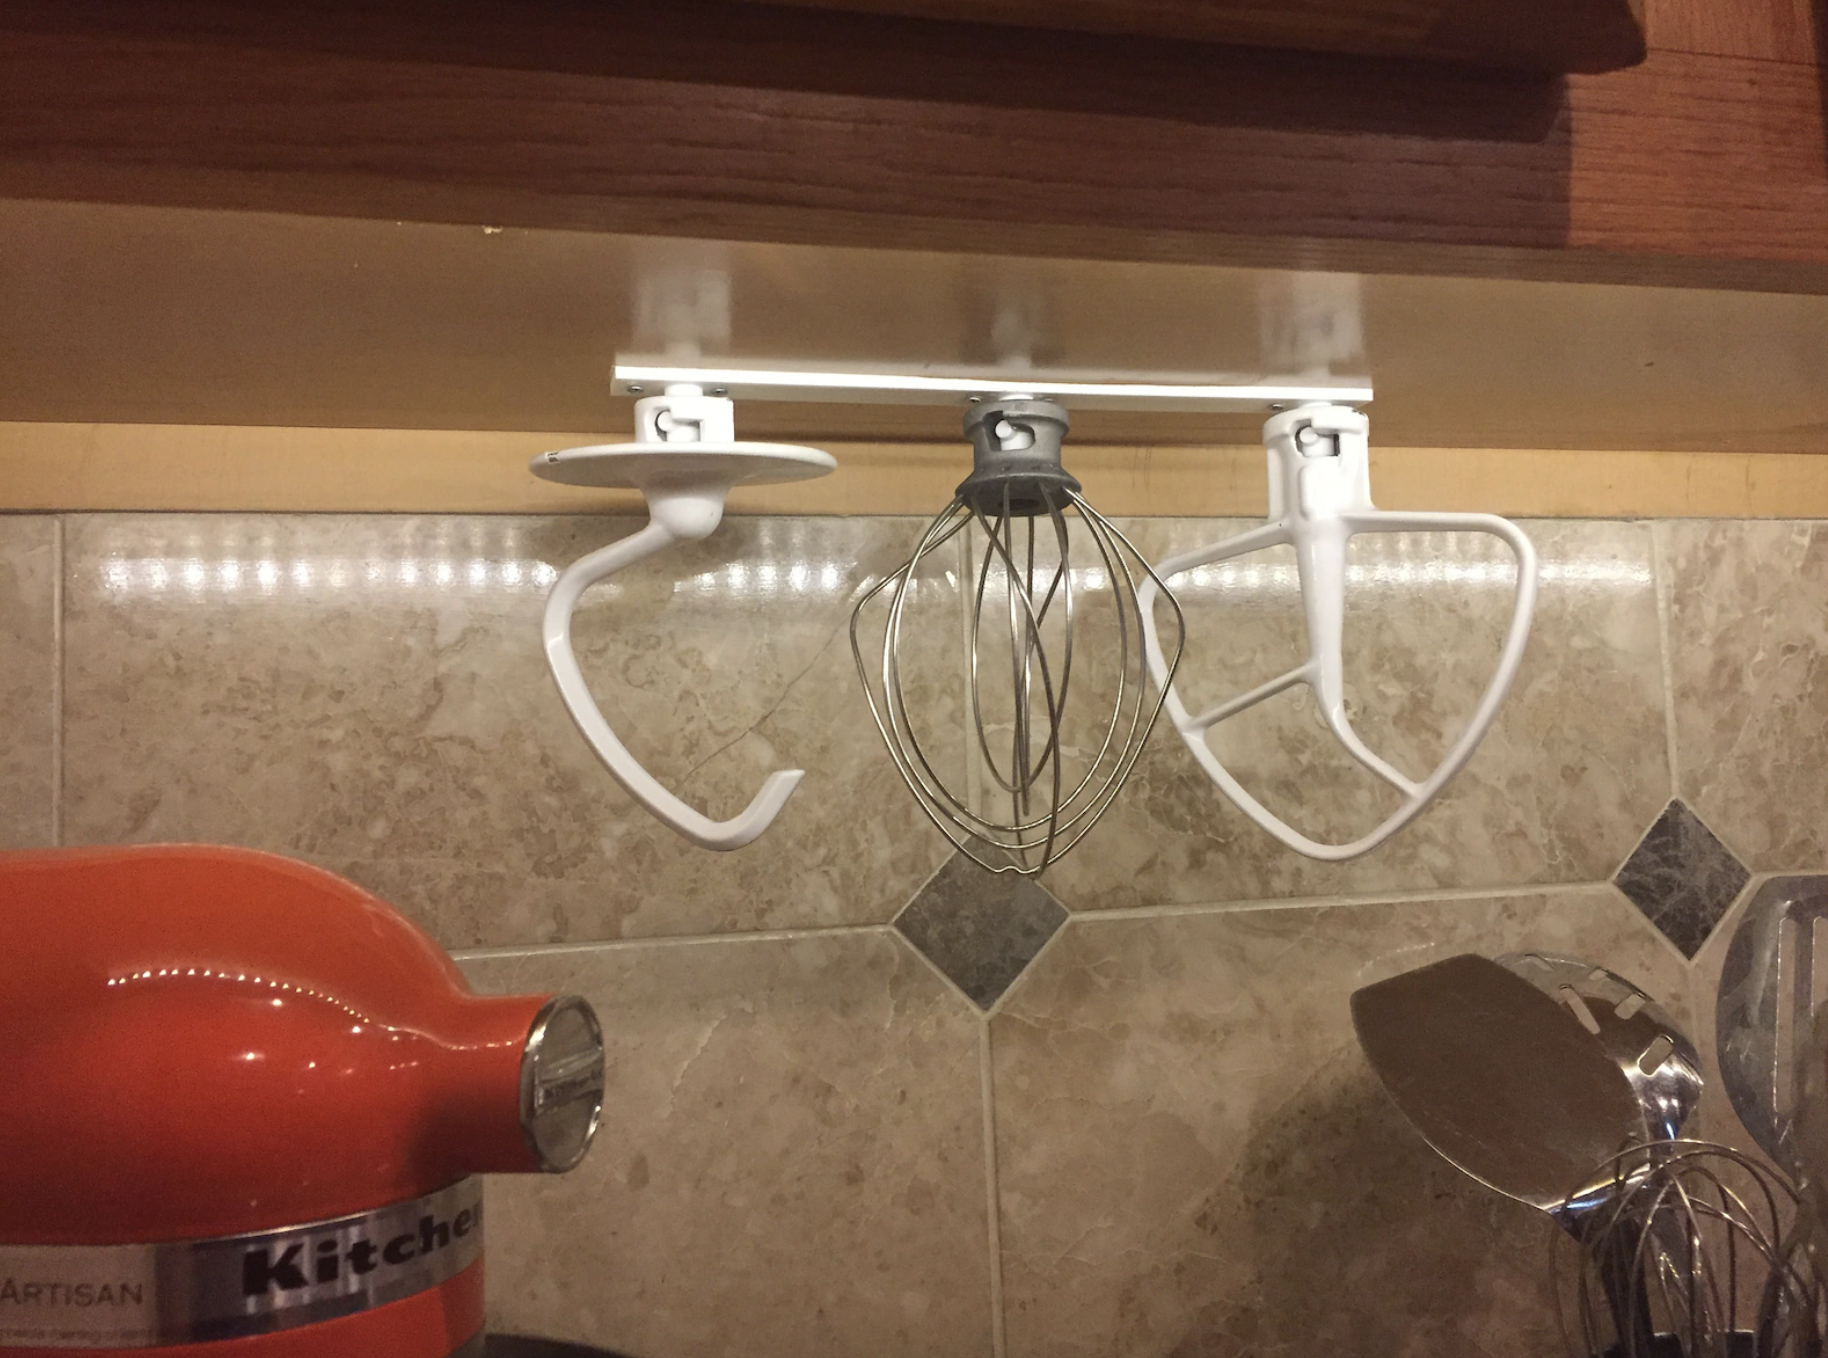 the mixer organizer attached to the underside of a kitchen cabinet